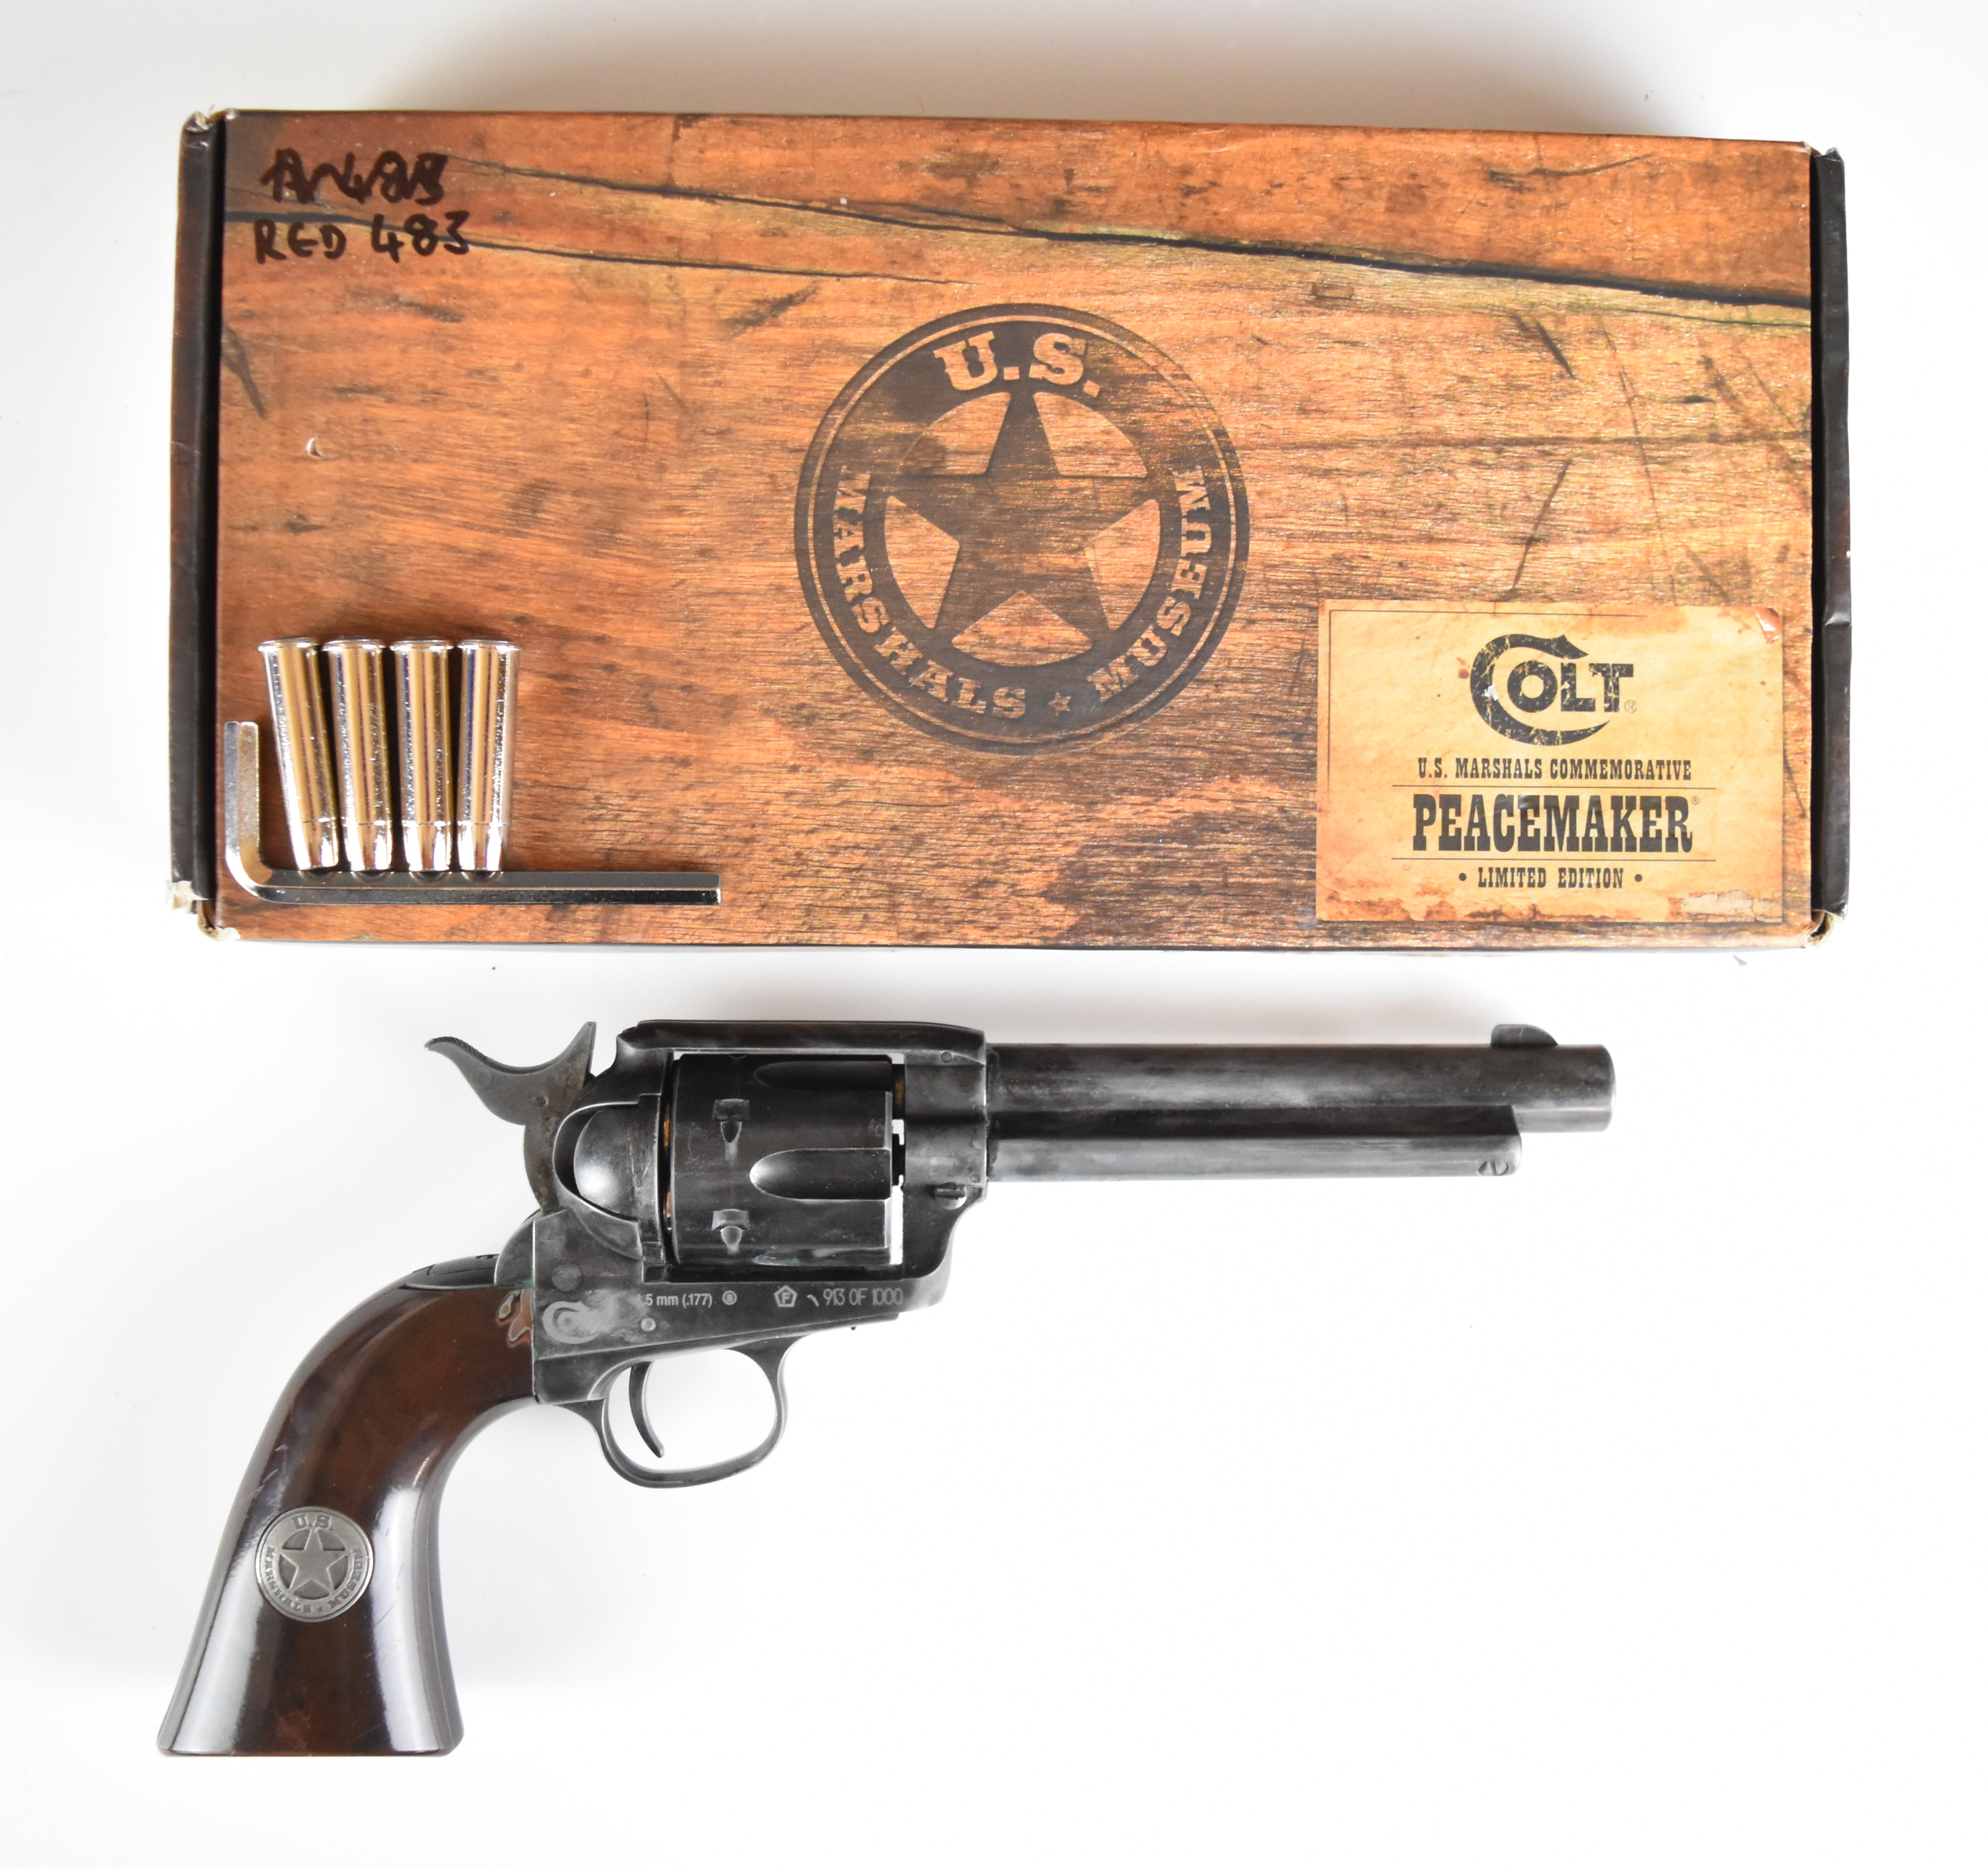 Umarex Colt Single Action Army .45 Peacemaker style .177 air pistol/ revolver with faux wooden